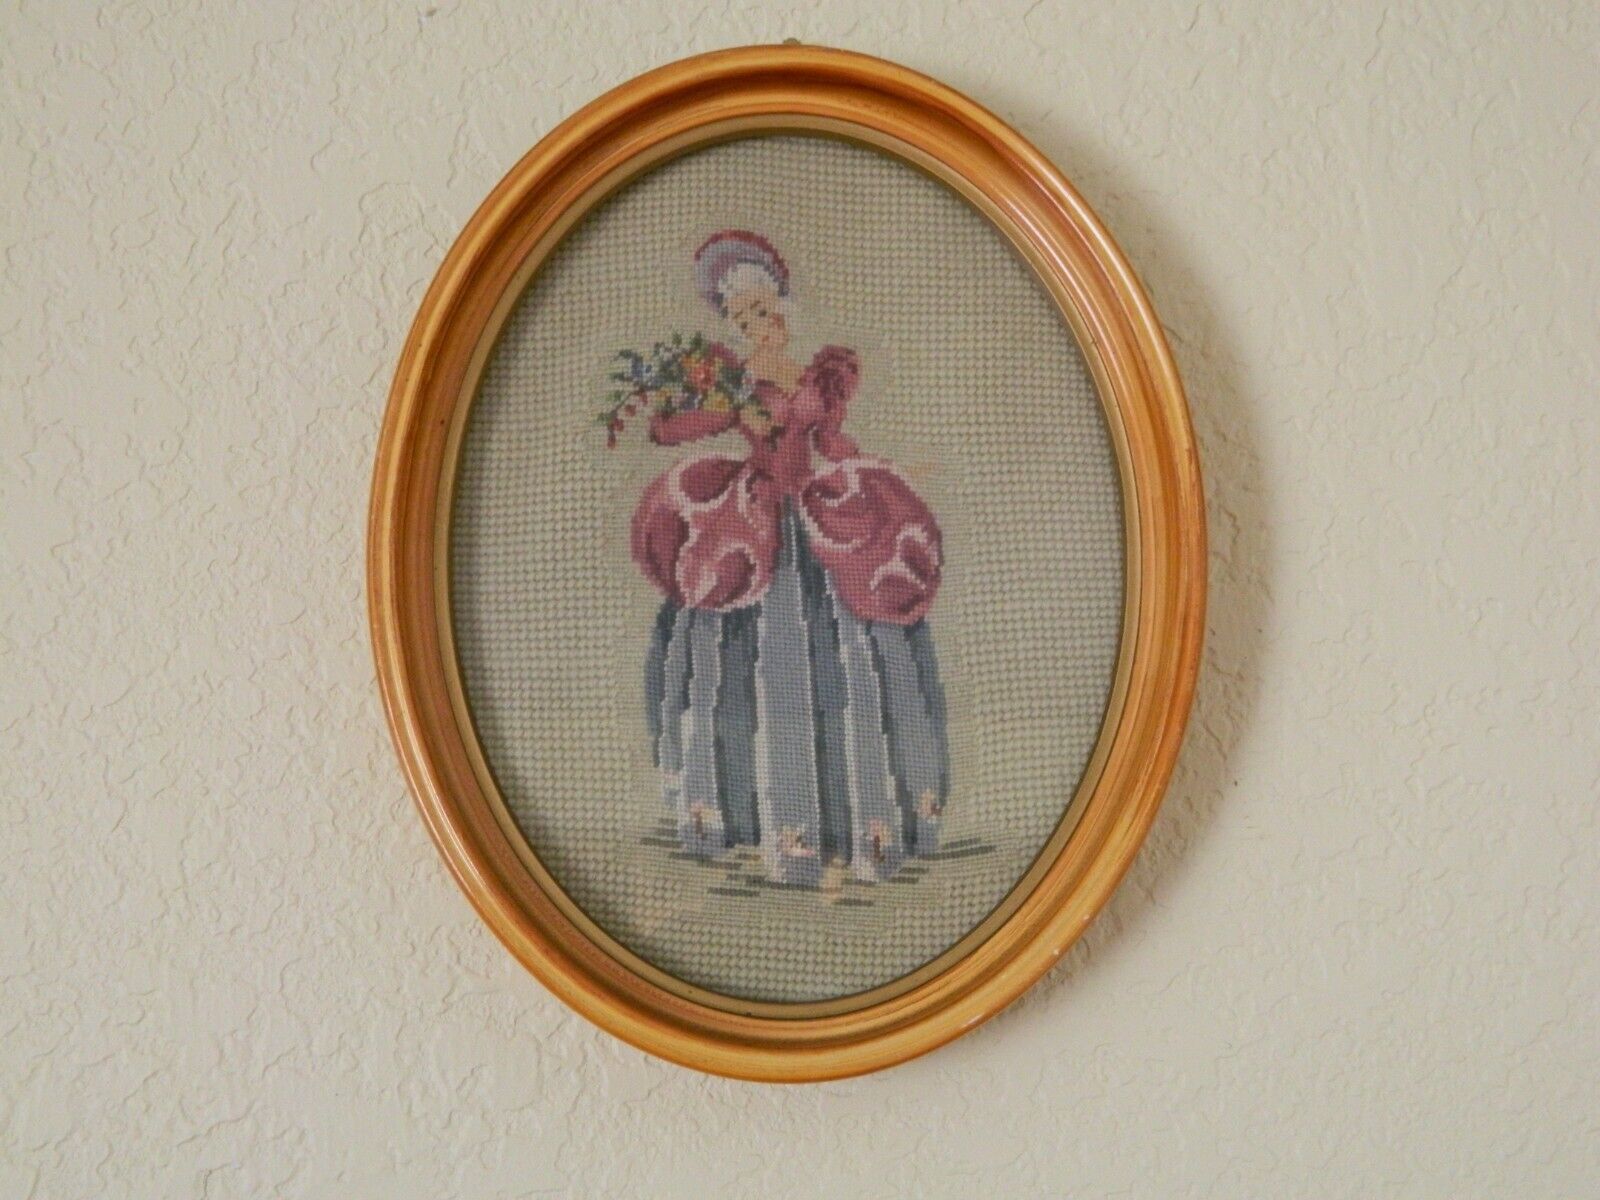 Vintage Needlework of a Woman in a Pink and Blue Dress with Flowers